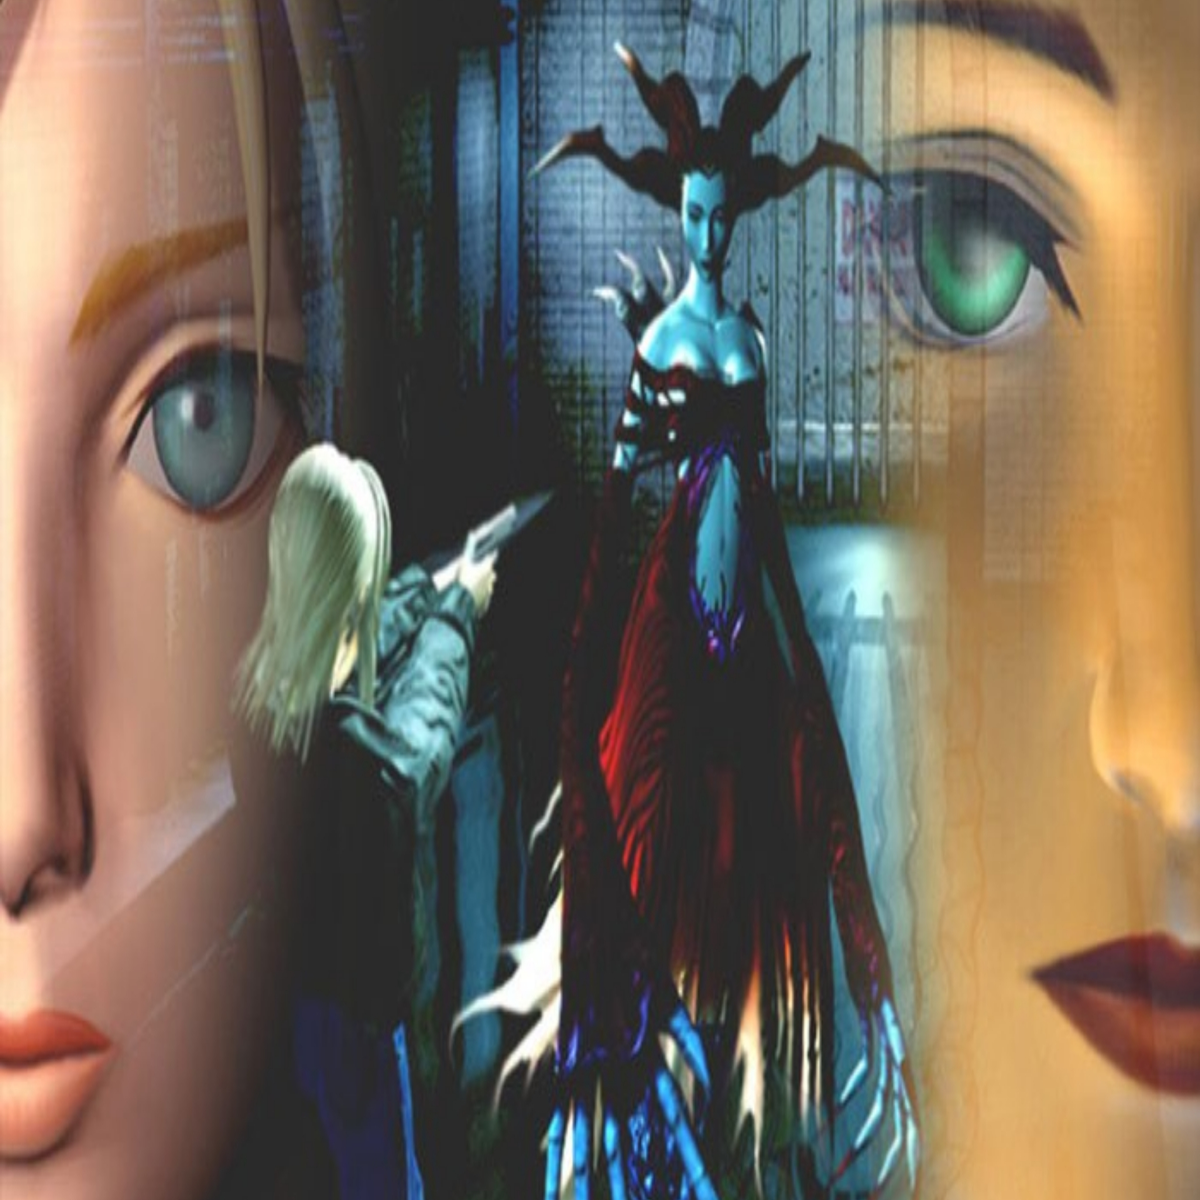 Parasite Eve Remastered, Game Ideas Wiki